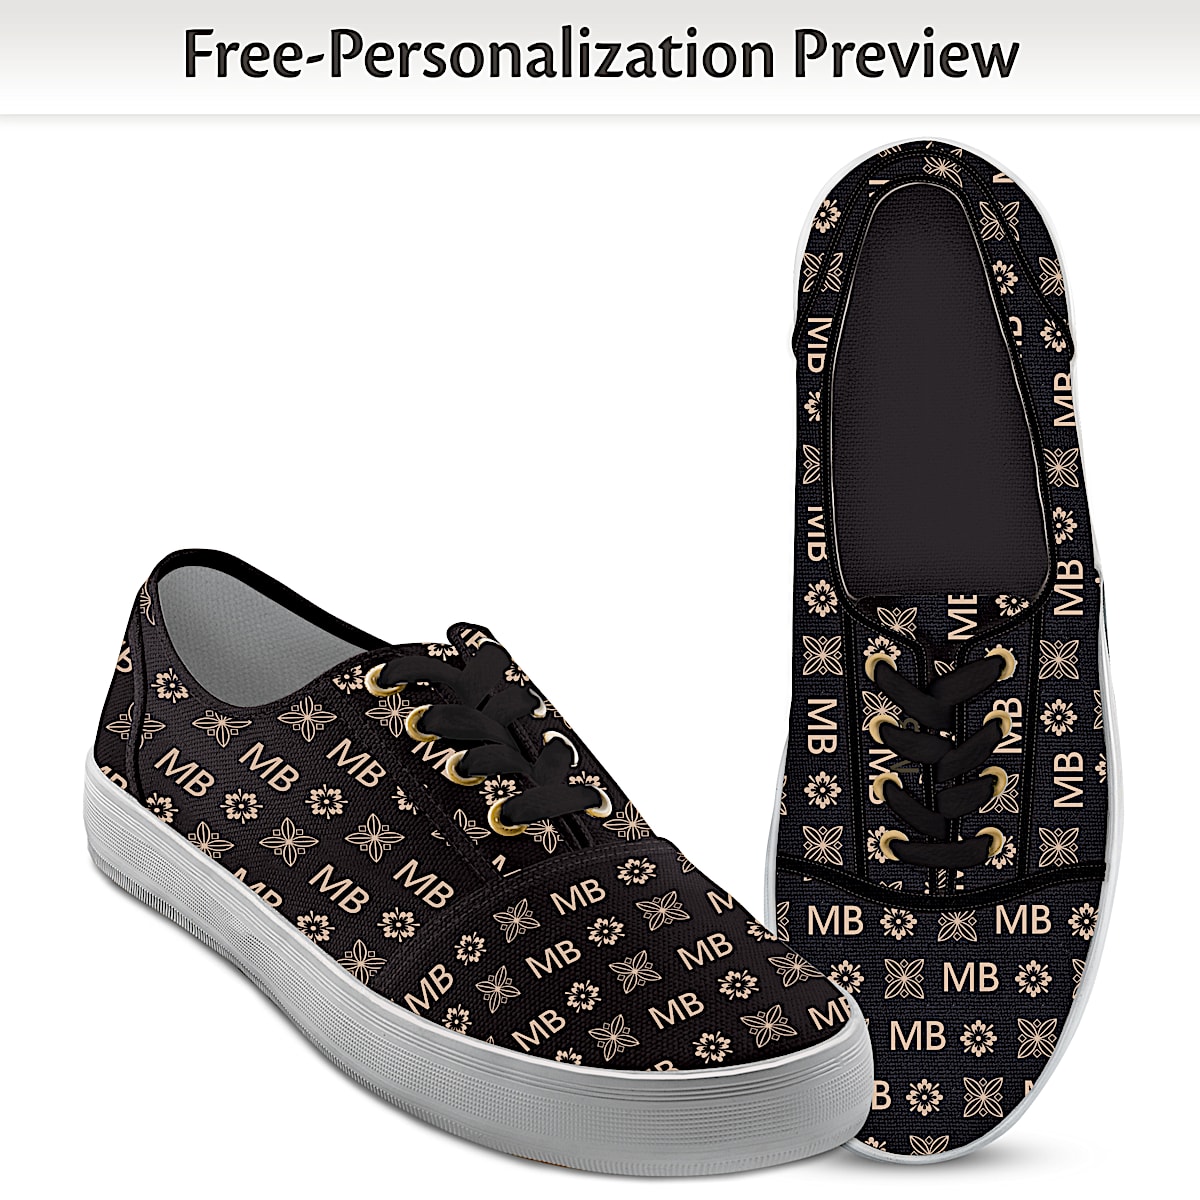 Just My Style Personalized Black Canvas Shoes Featuring An All-Over Tan ...